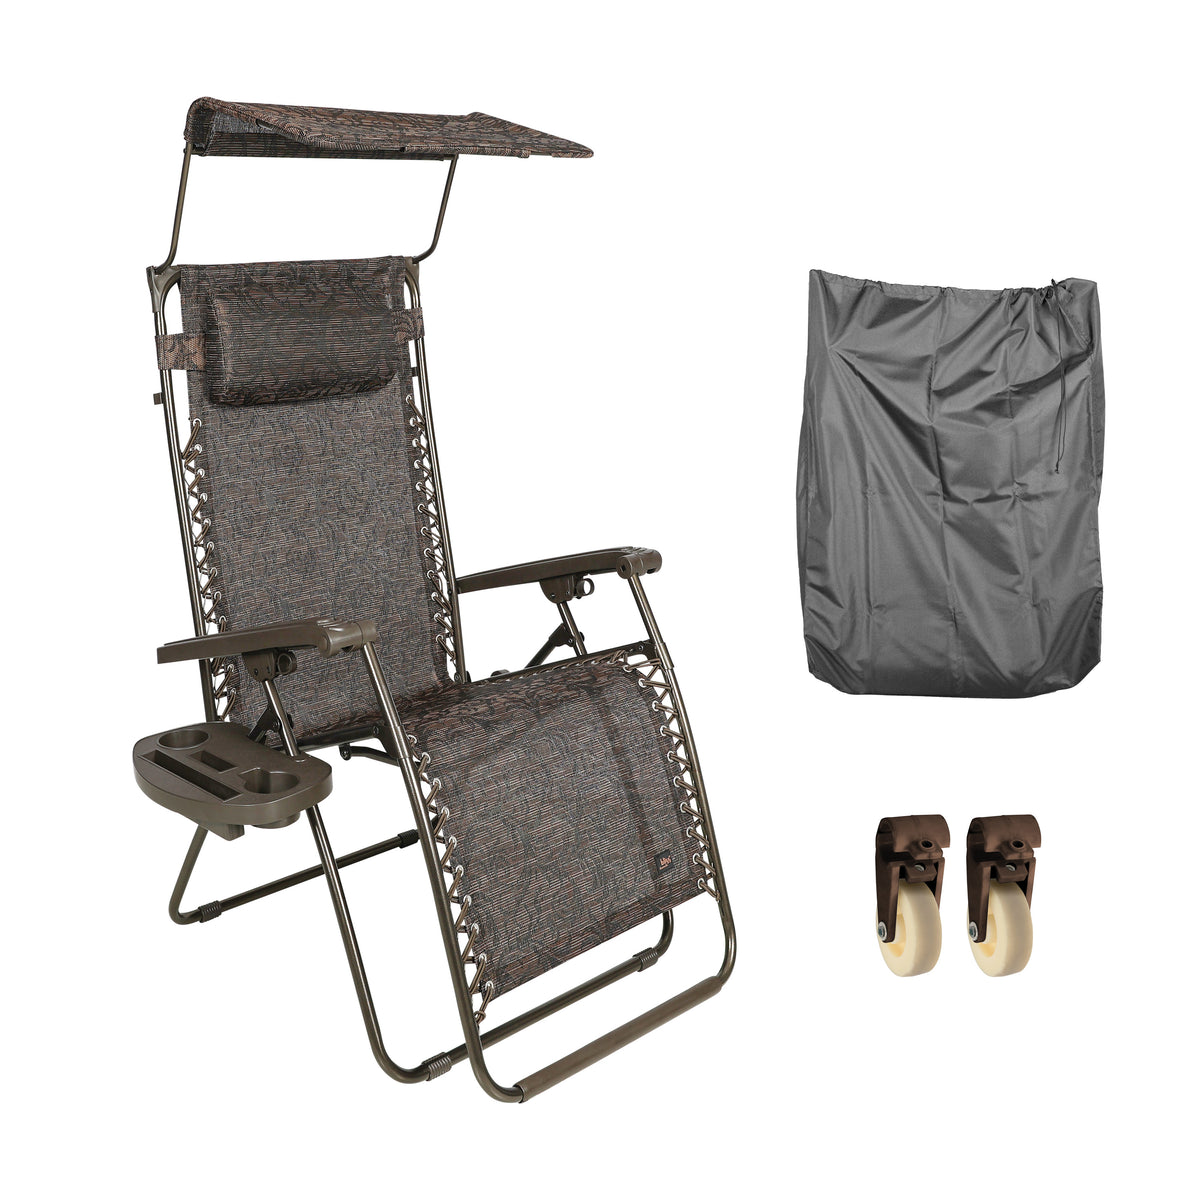 Bliss Hammocks 26-inch Wide Zero Gravity Chair with Canopy, Pillow, and Drink Tray in the brown jacquard variation with a Zero Gravity Chair Furniture Cover and Set of 2 Wheel Kit for Gravity Free Chairs in the brown variation.